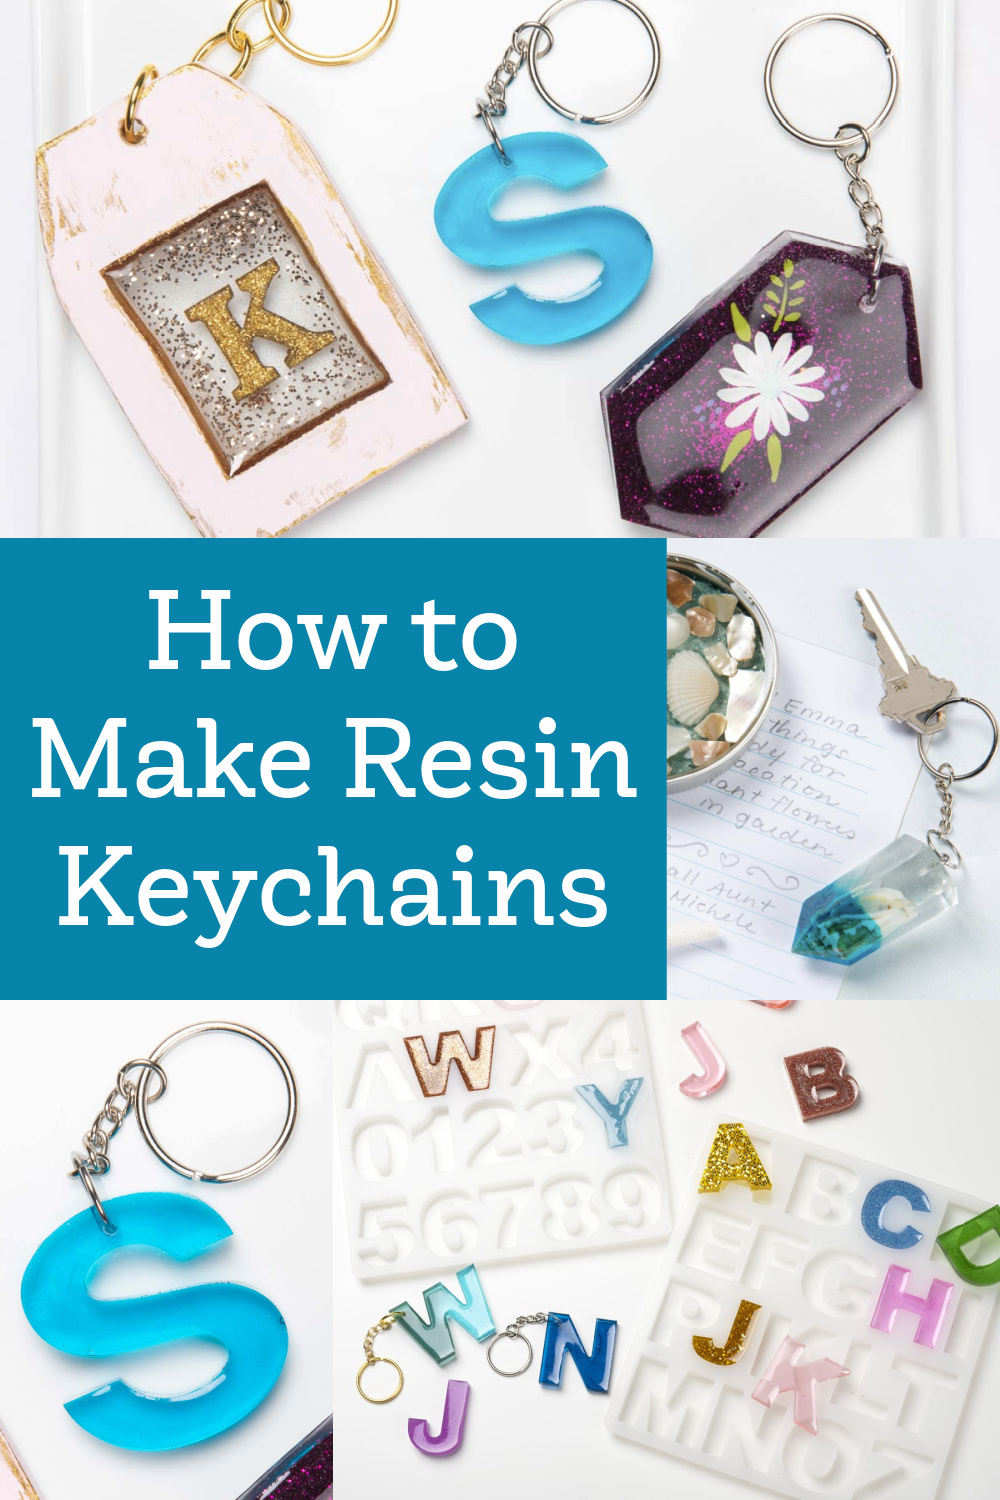 How to Make Resin Keychains